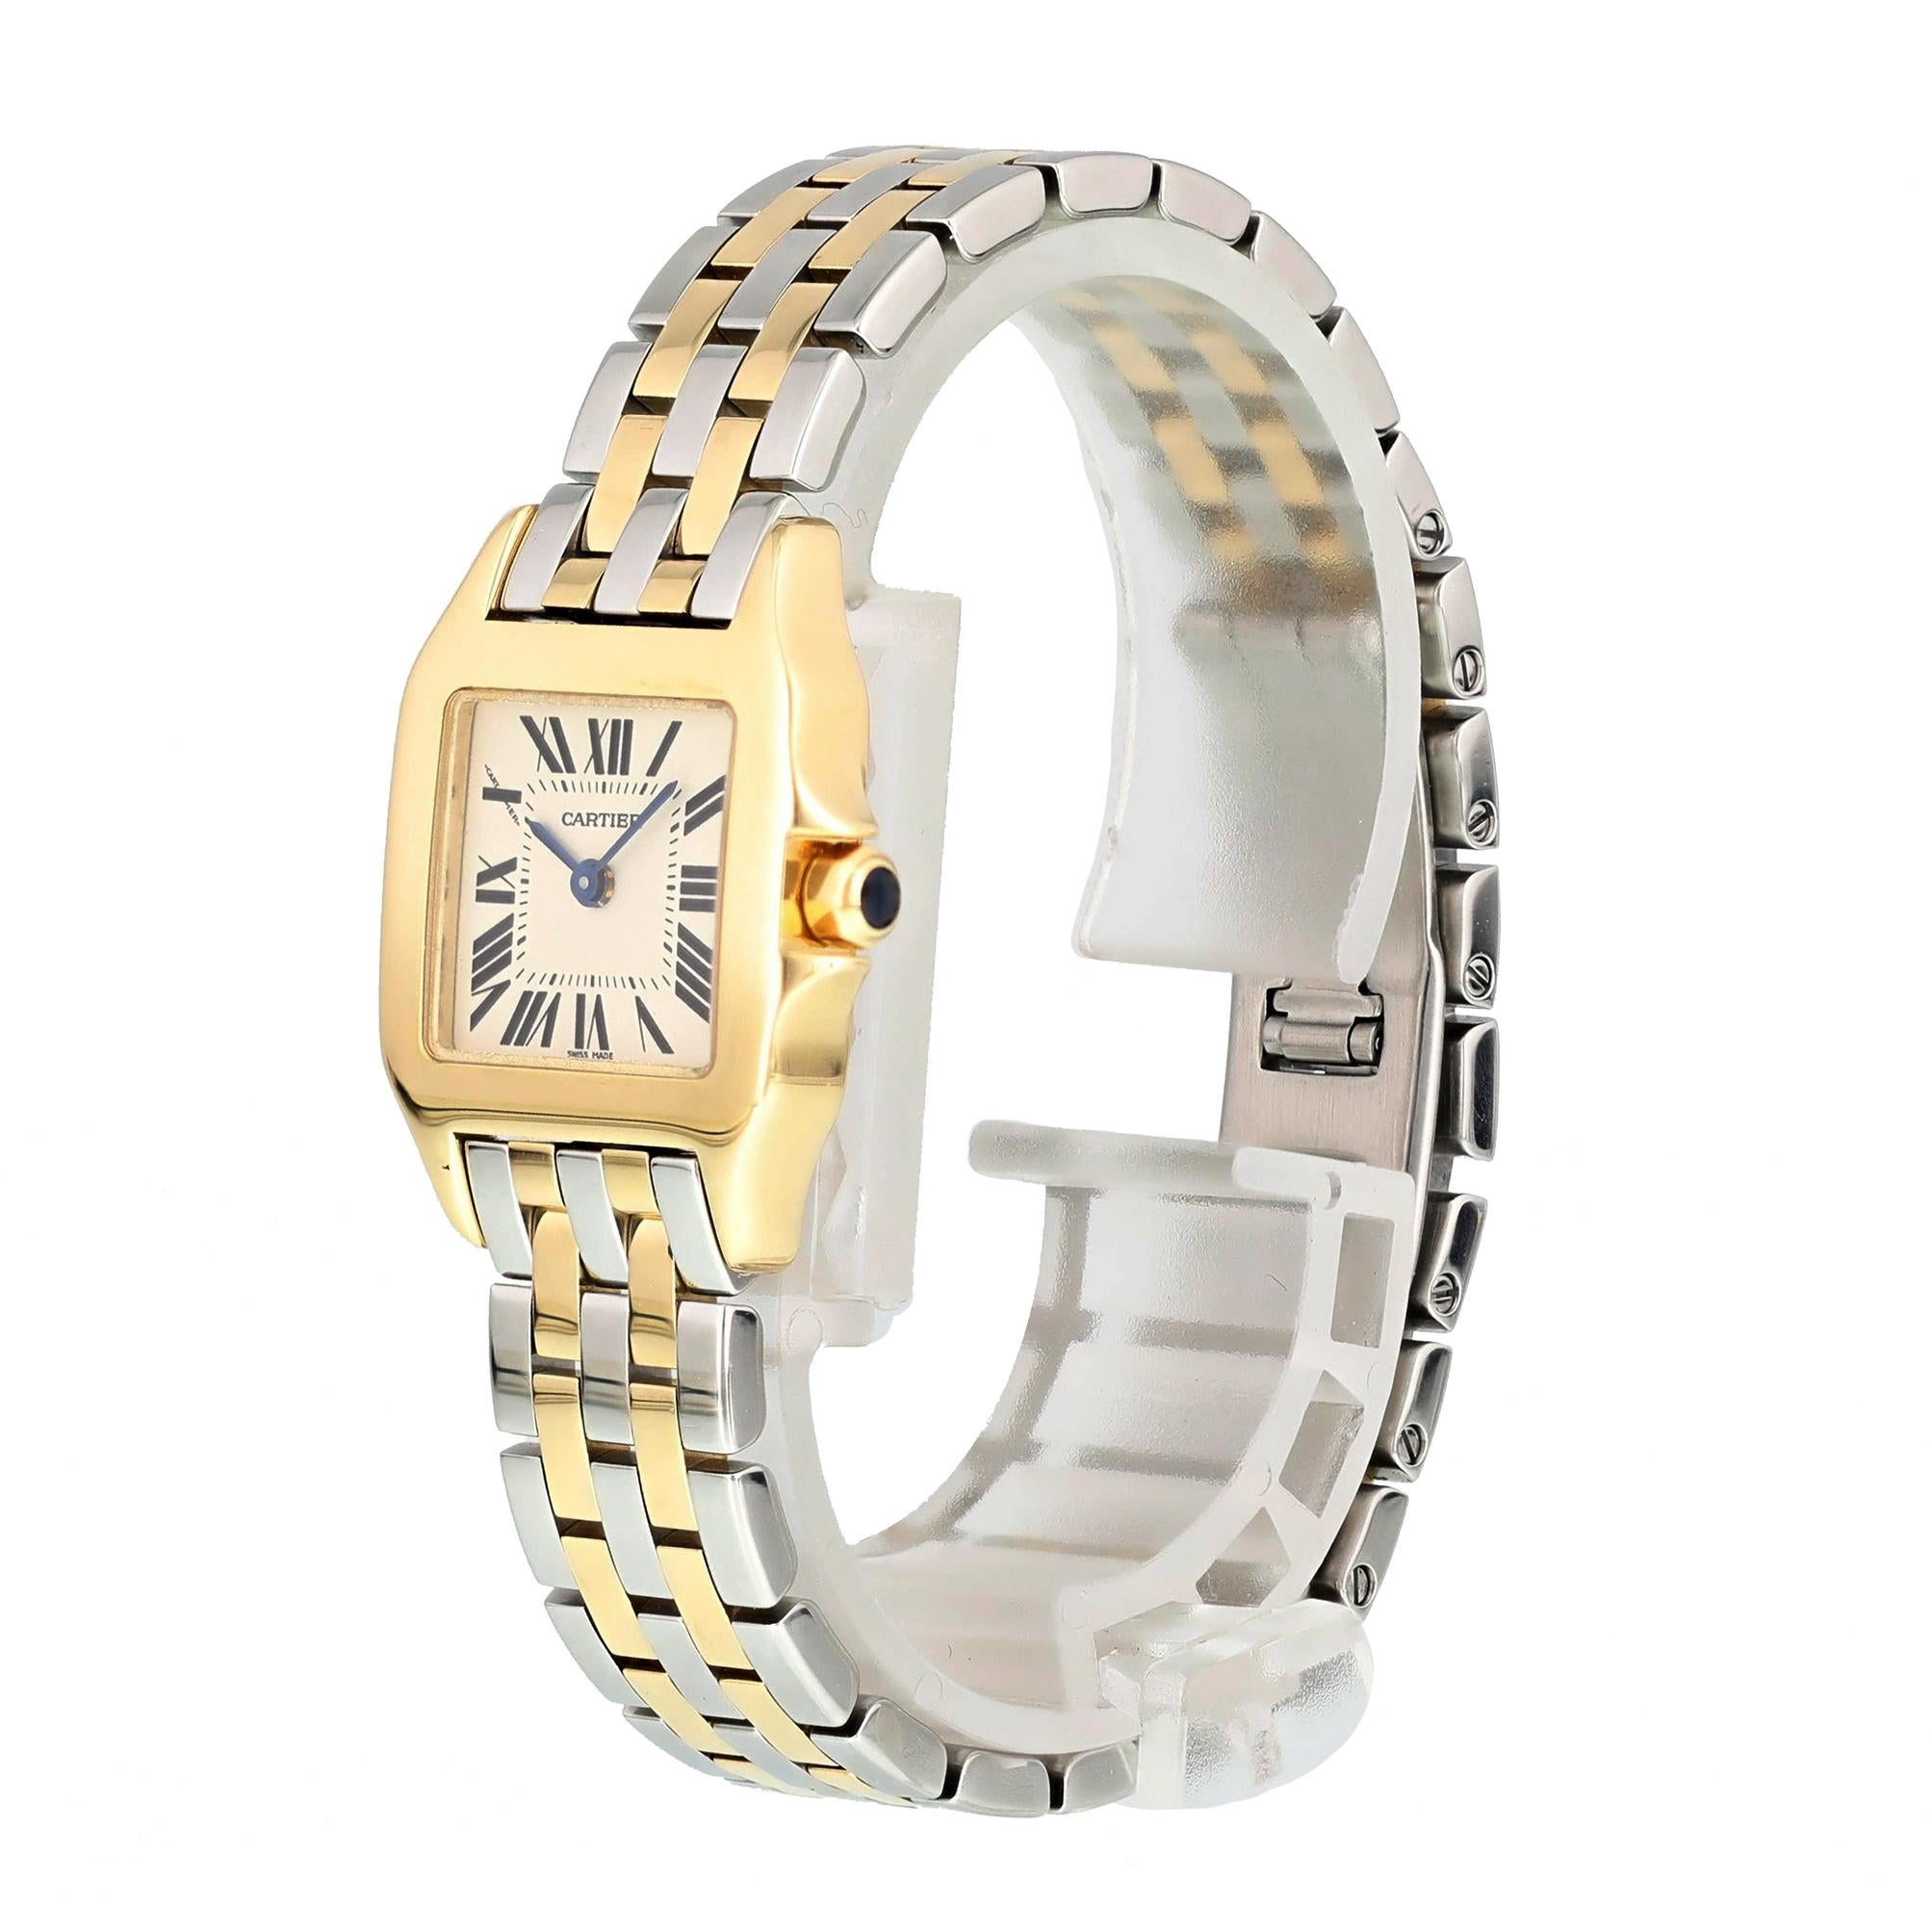 Cartier Santos Demoiselle 2699 Ladies Watch.
20mm 18k Yellow Gold case. 
Yellow Gold Stationary bezel. 
Off-White dial with Blue steel hands and Roman numeral hour markers. 
Minute markers on the inner dial. 
Stainless Steel Two-tone Bracelet with